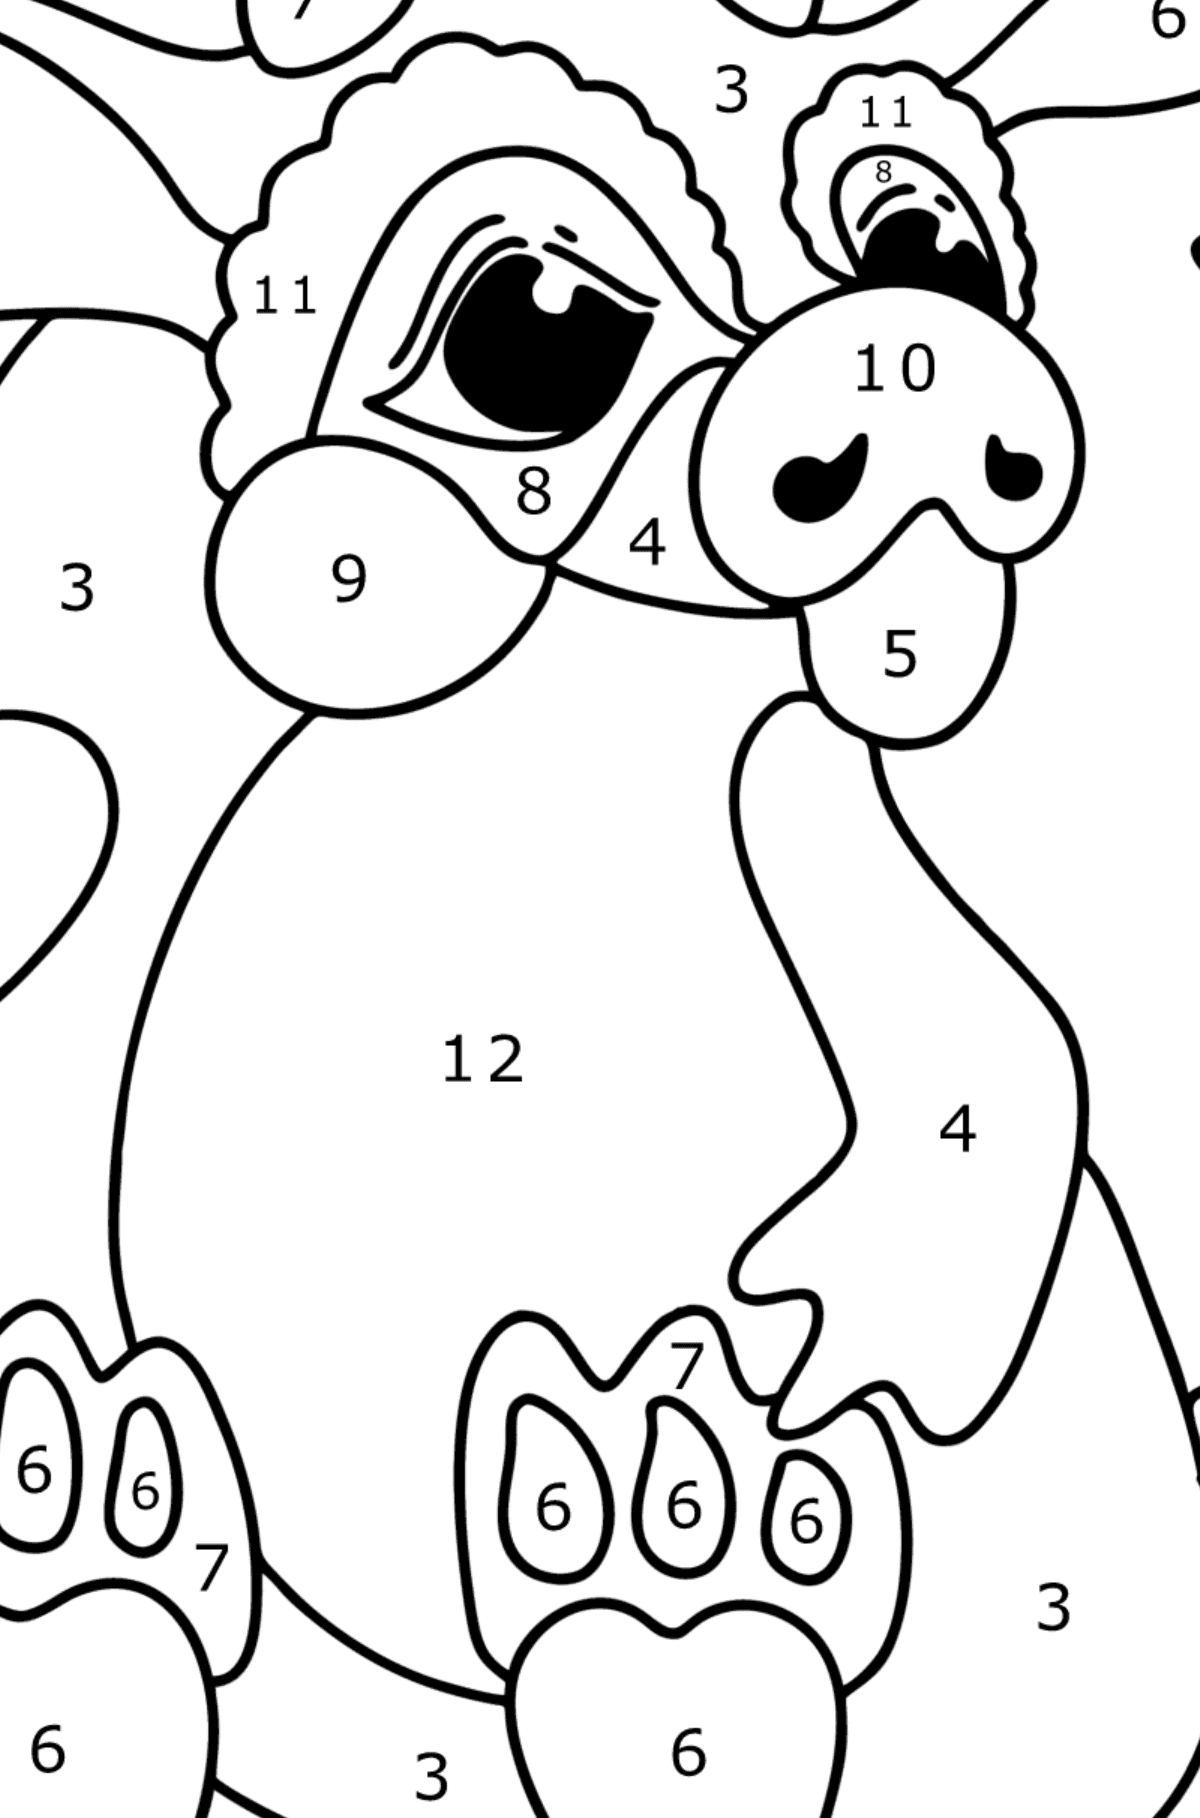 Dreamy dragon coloring page - Coloring by Numbers for Kids